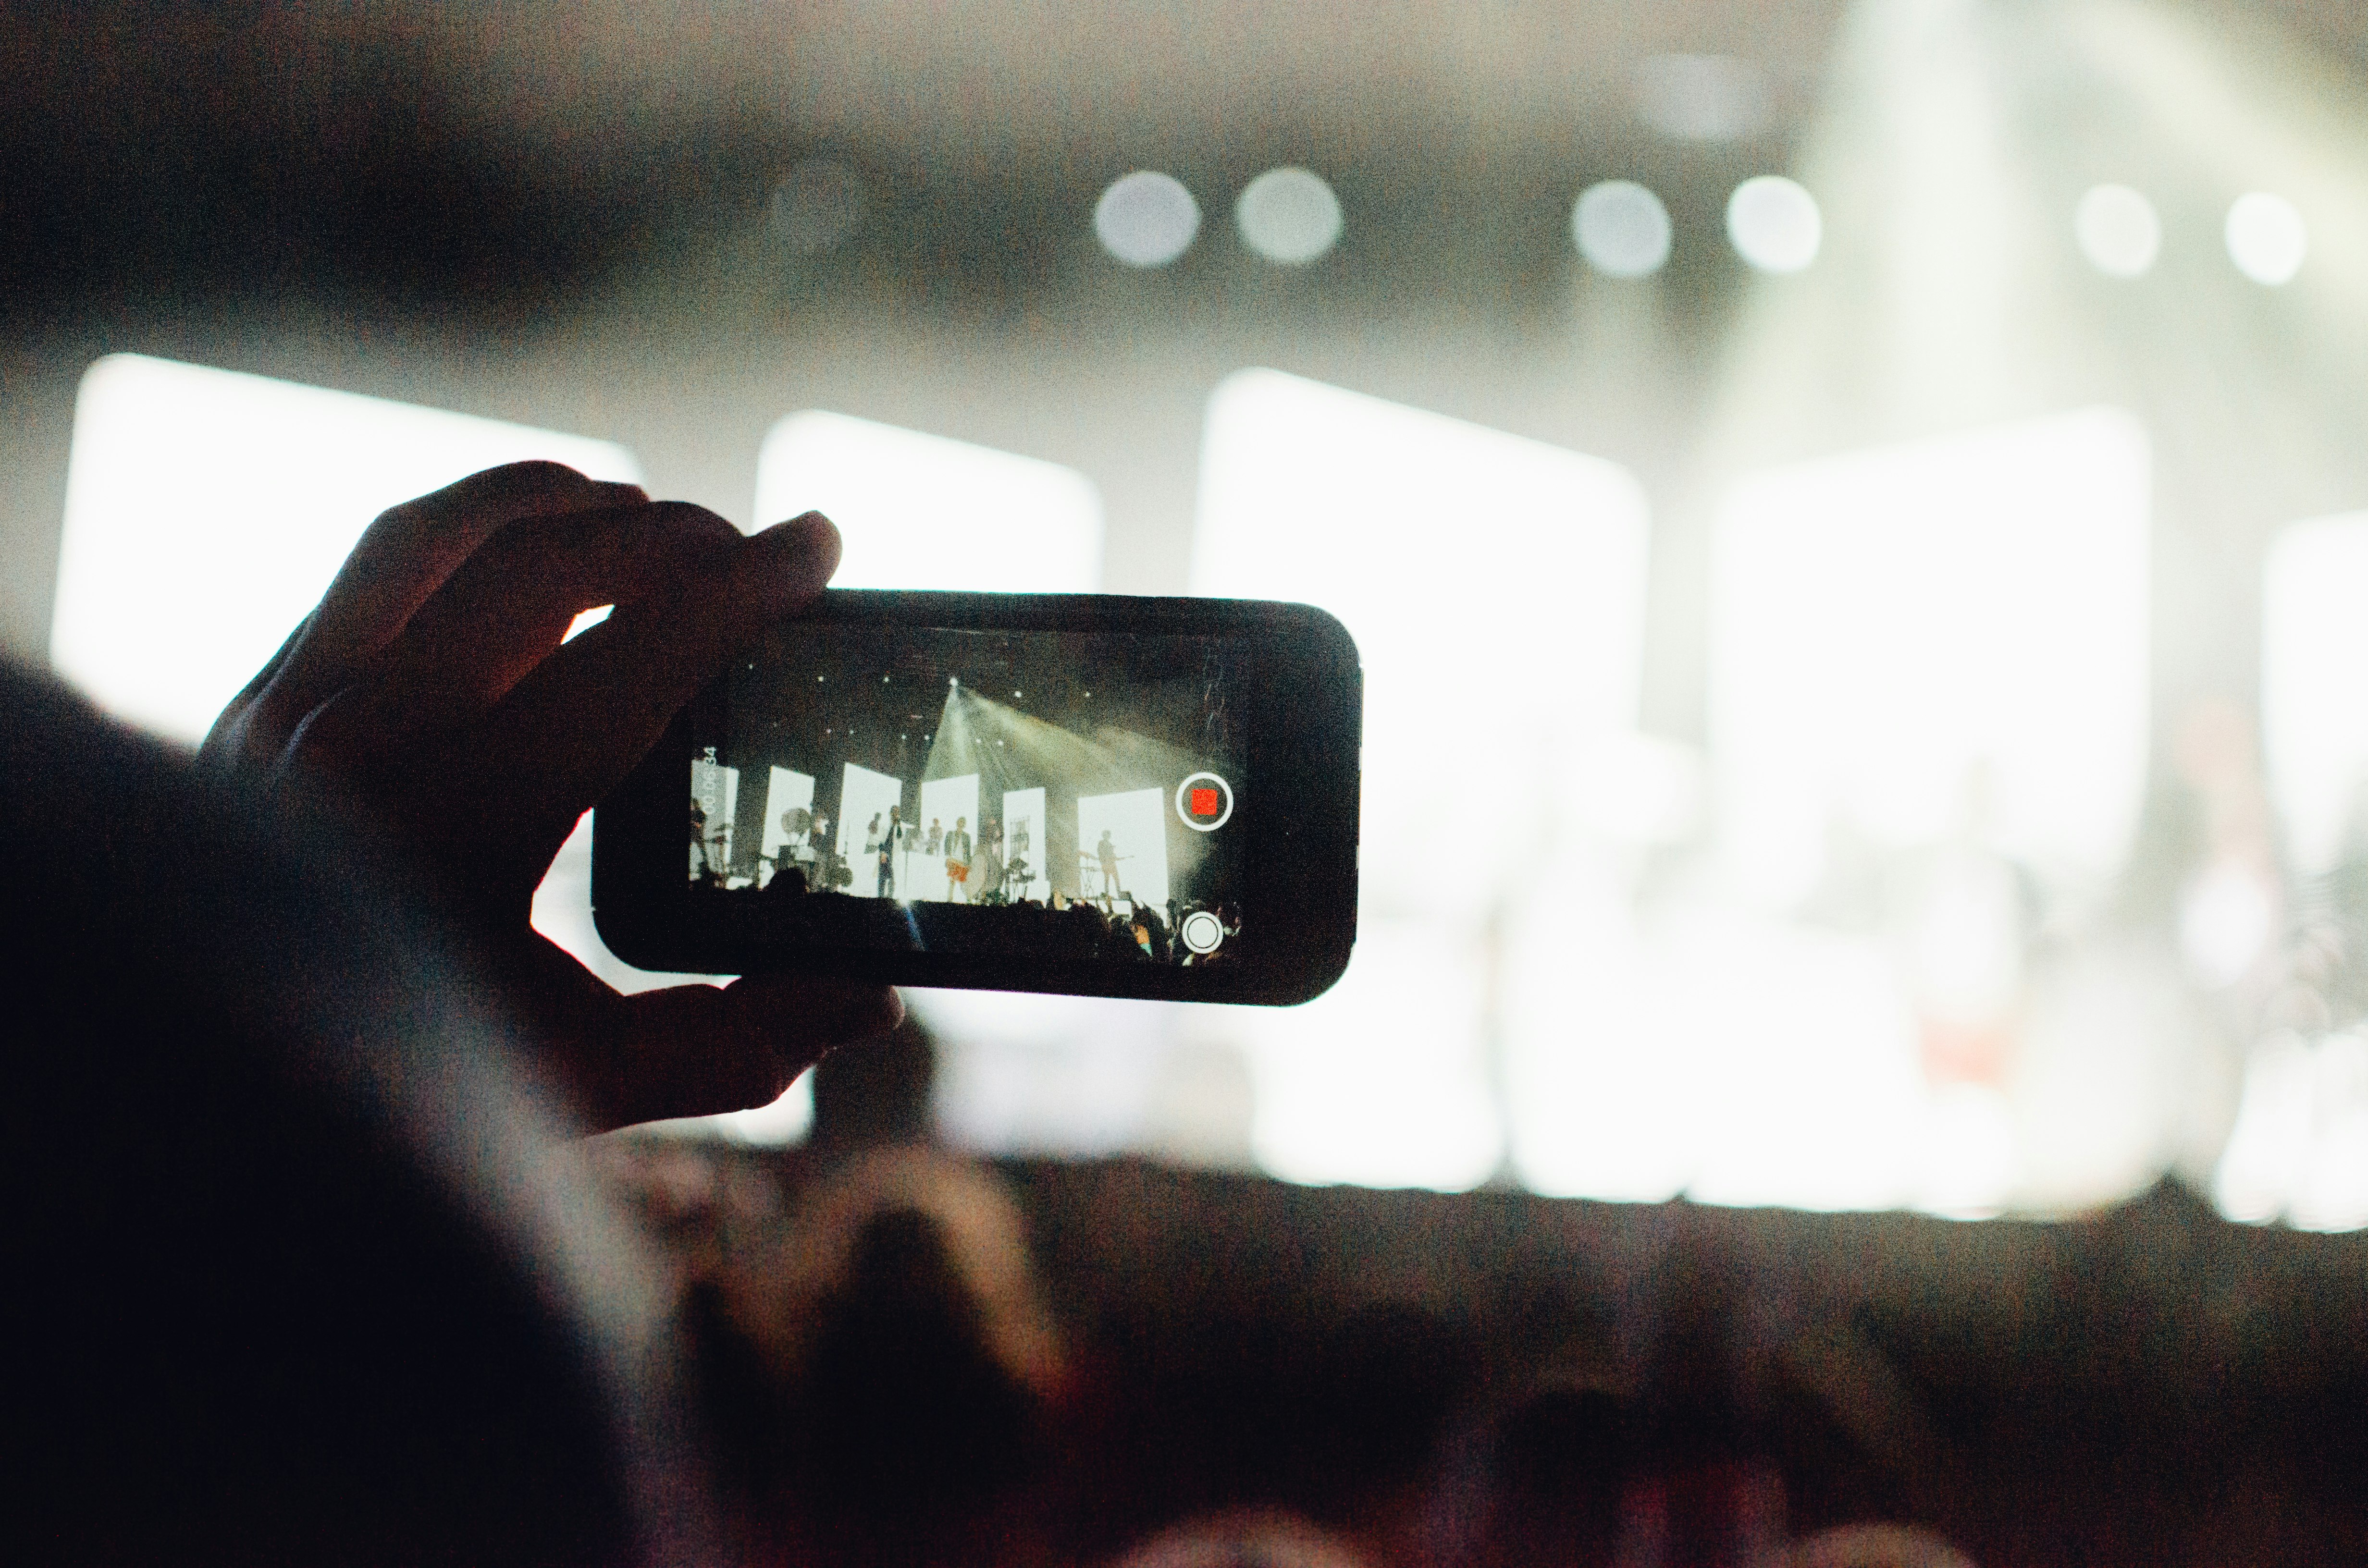 This photo was taken at the ALIVE Christian Musical Festival in 2019. There were so many great concerts and so many good photos to be taken, but the real treat was seeing what the crowd took notice of and wanted to remember. This is a photo of a man taking a video of one of the concerts using his Apple iPhone, so that he could remember this moment for the rest of his life.